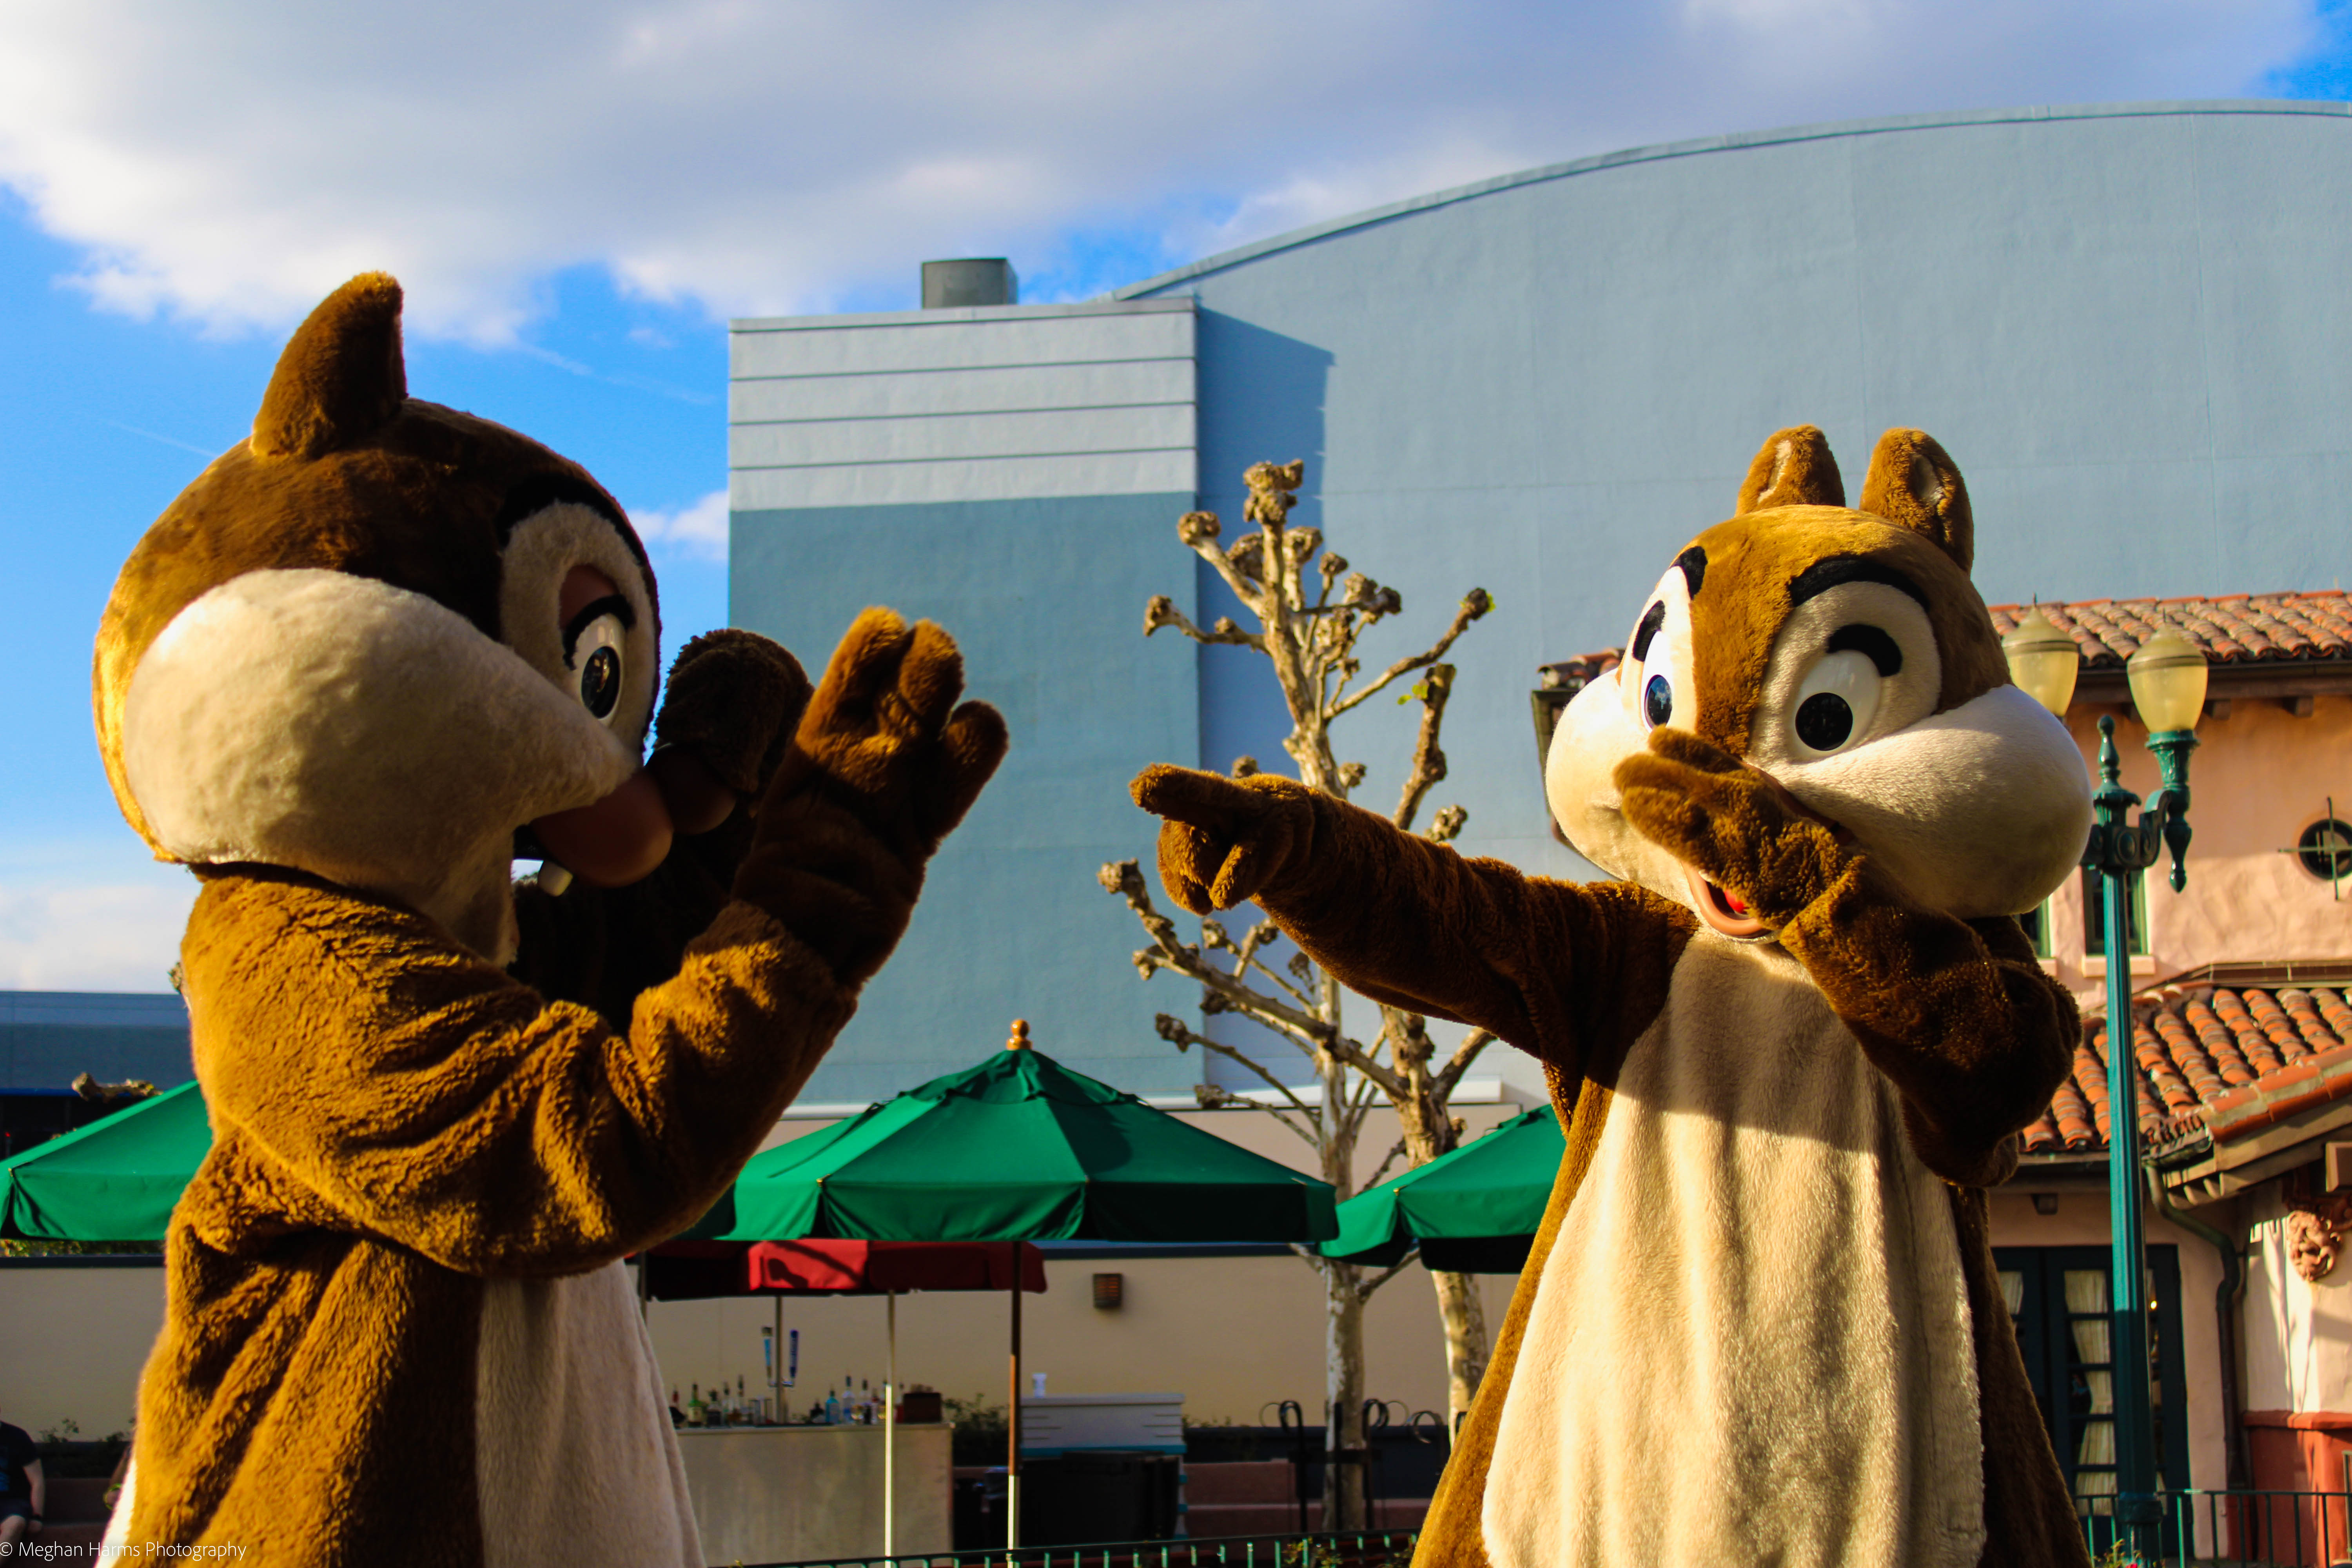 Chipmunks, Chip and Dale. Chip is pointing at Dale while Dale has his hands up in front of his face